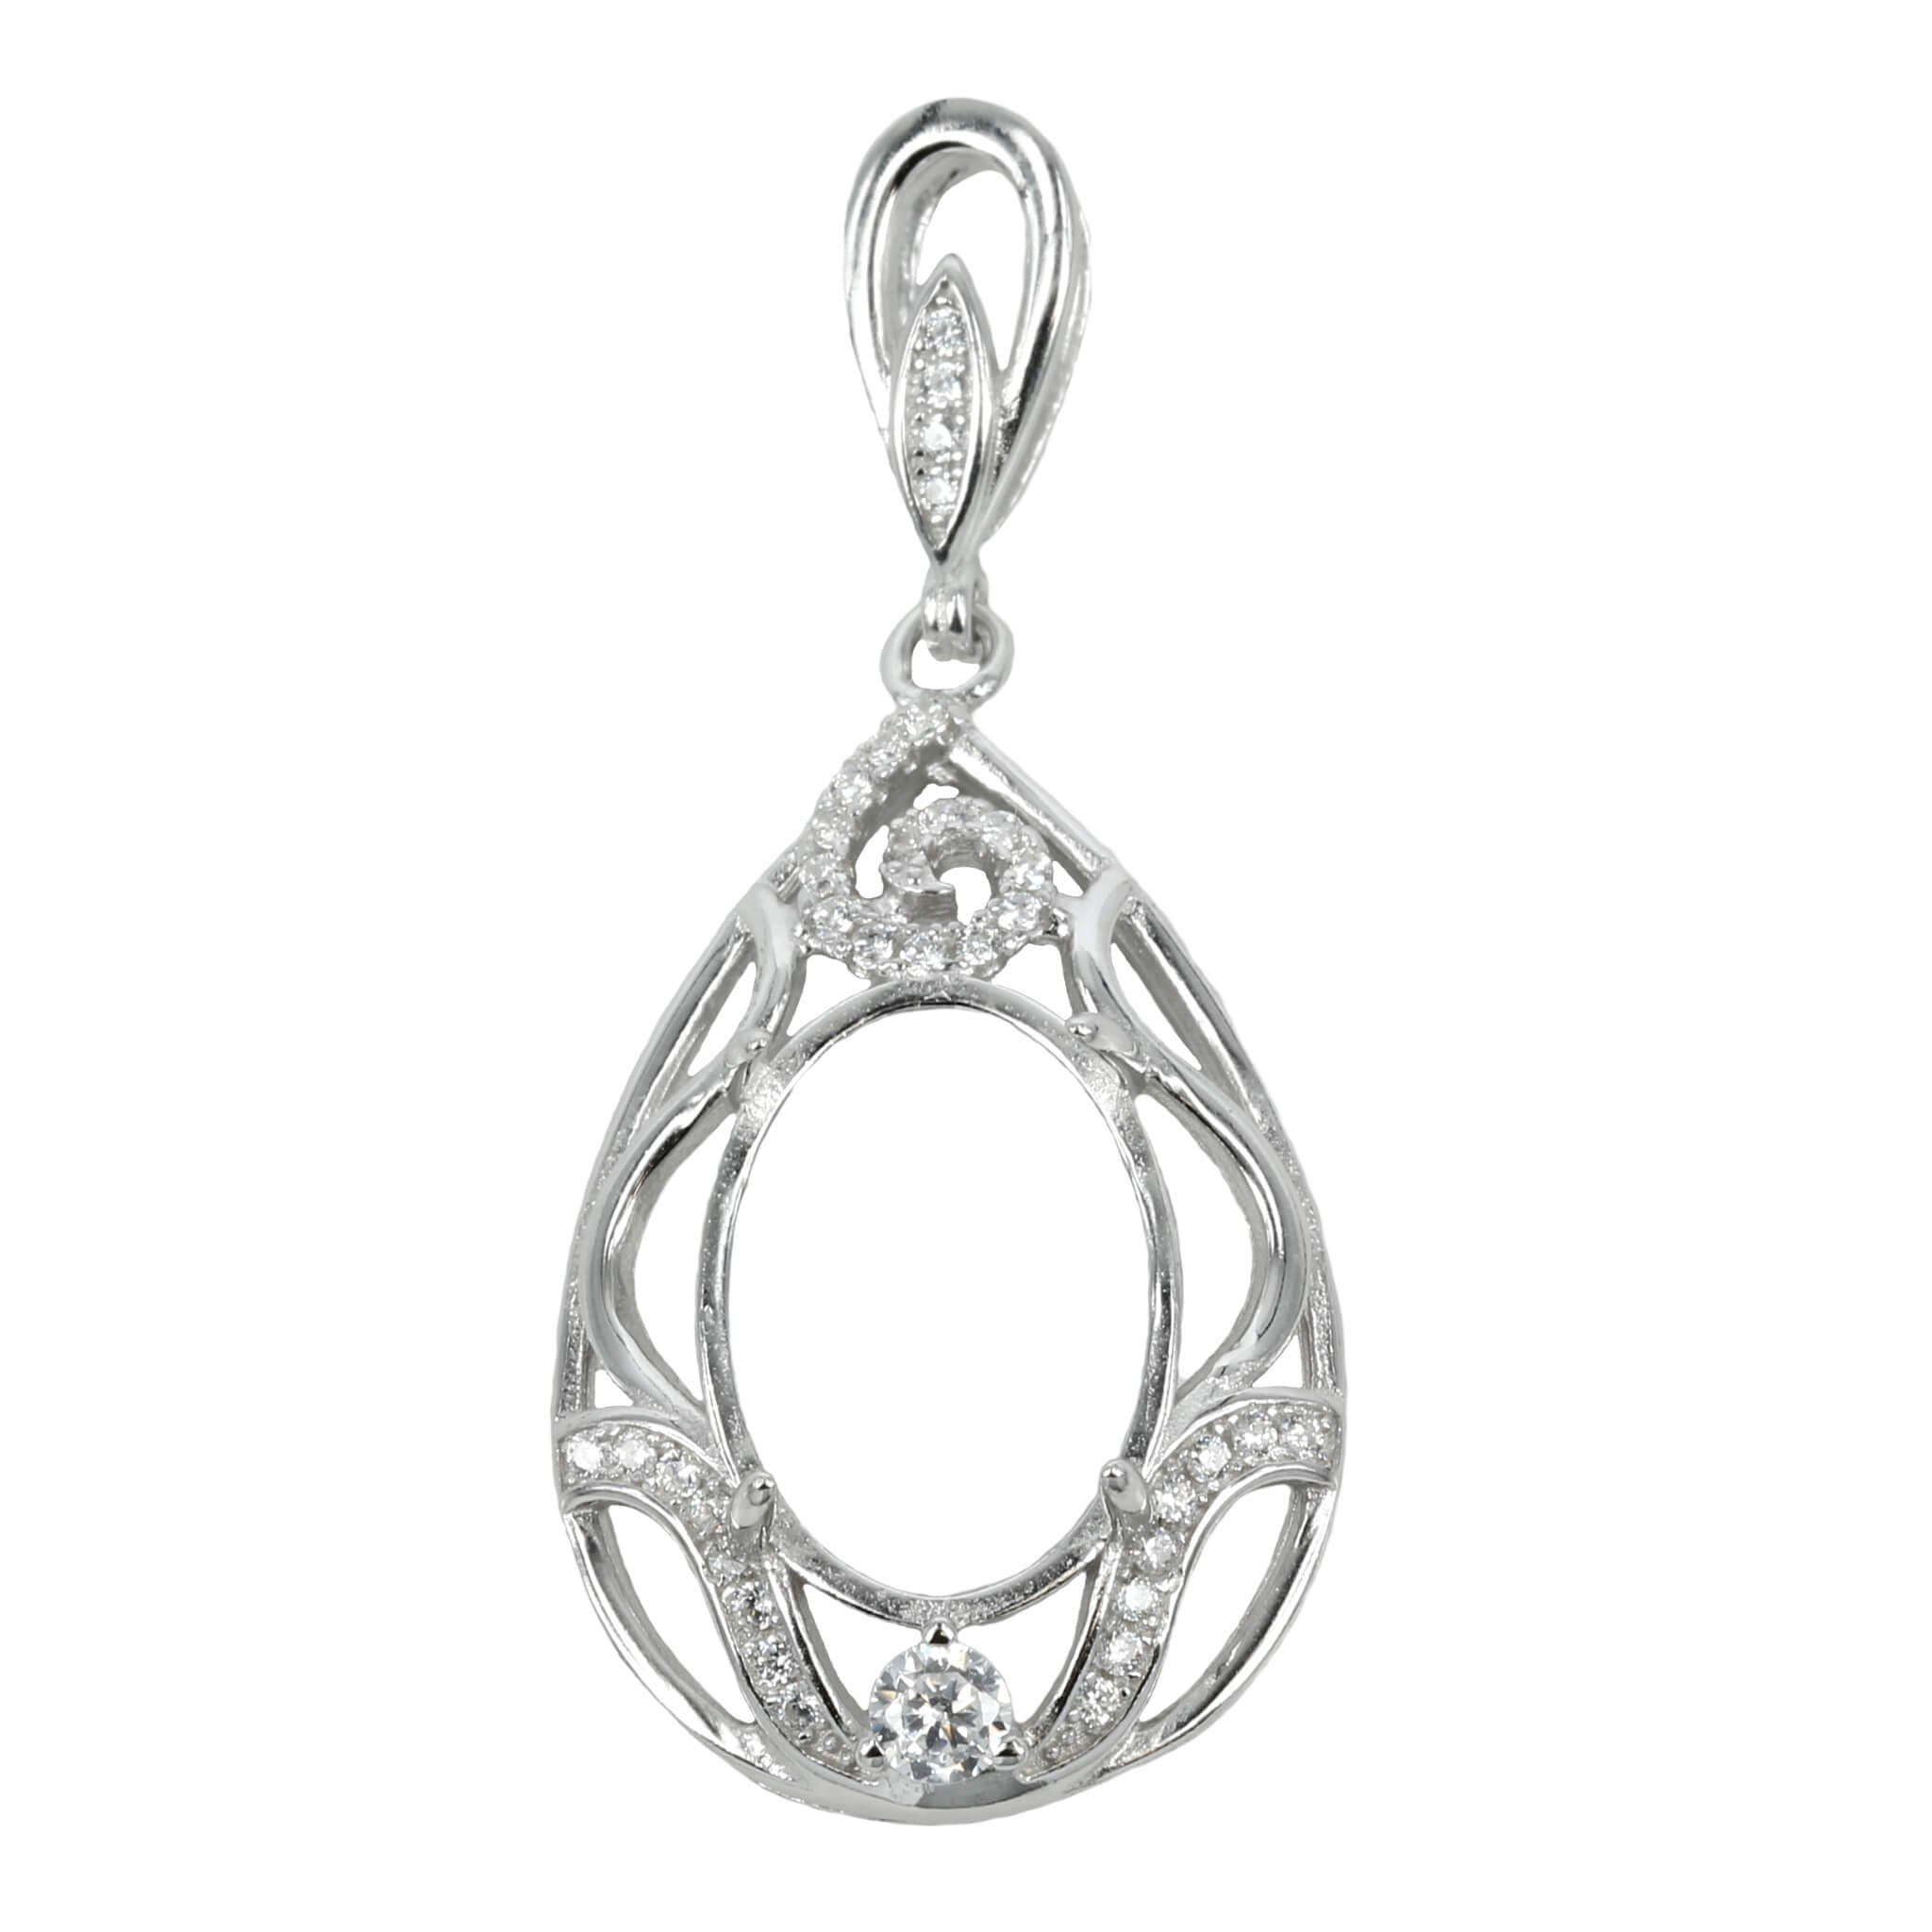 Pear Frame Oval Pendant Set with Cubic Zirconias and Soldered Loop and Bail in Sterling Silver 10x14mm